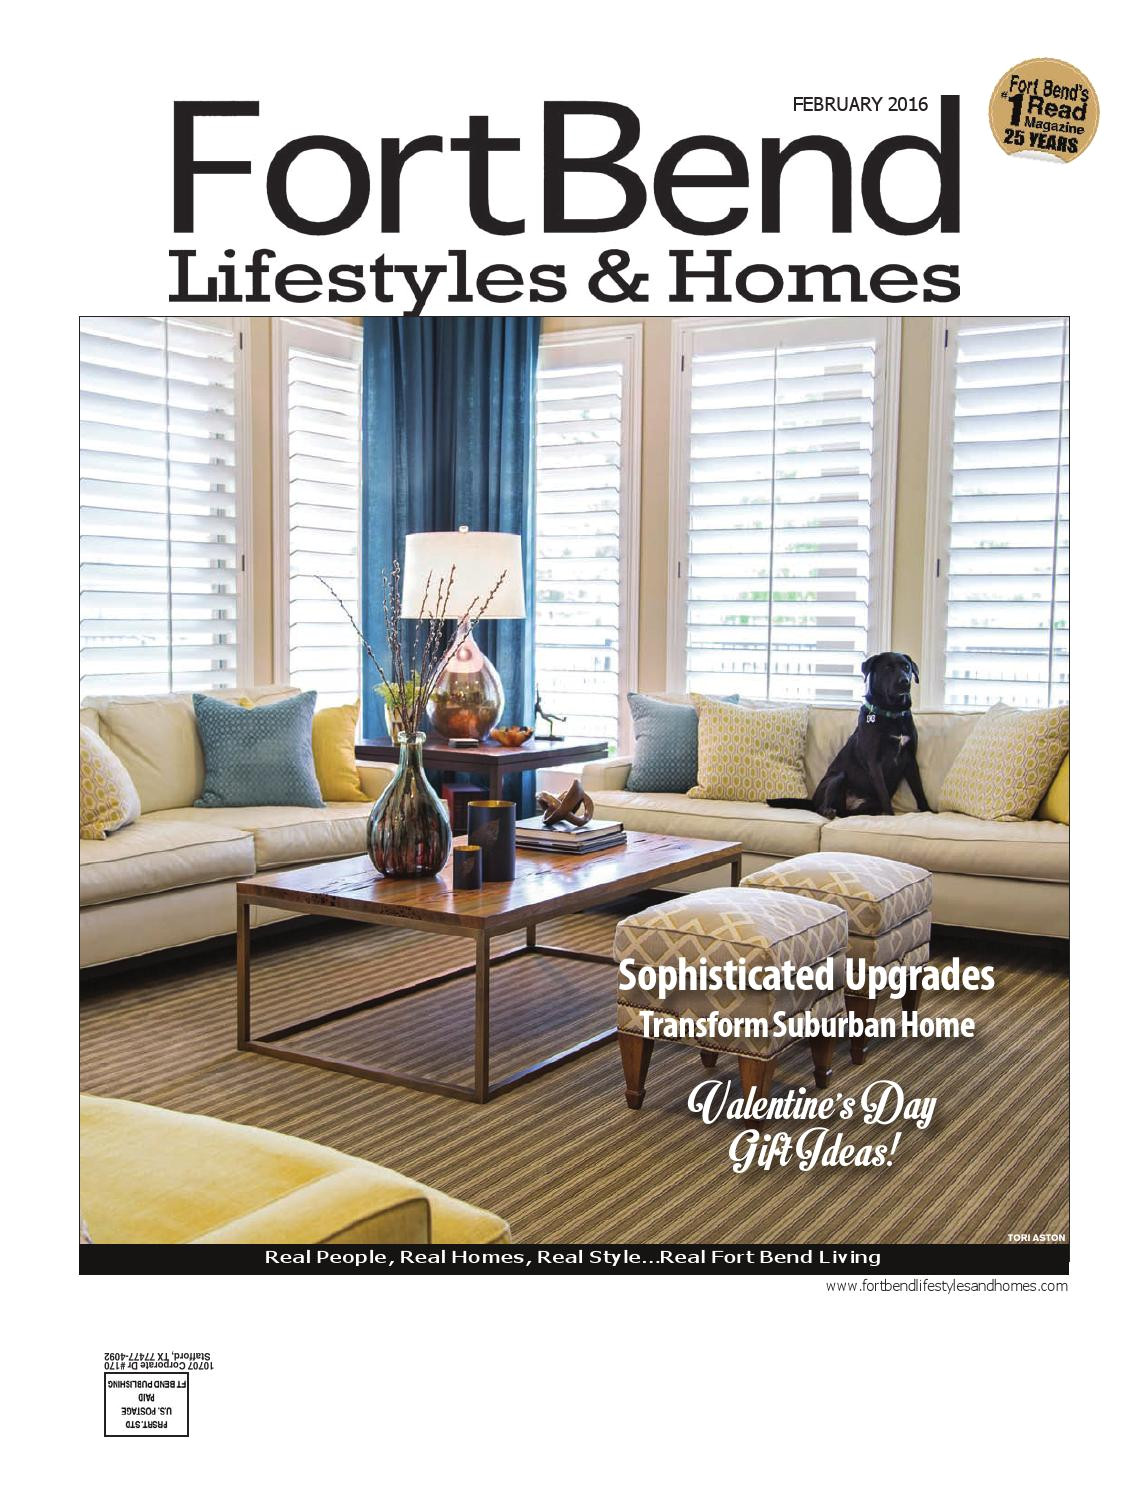 fort bend lifestyles homes february 2016 by lifestyles homes magazines fort bend publishing issuu